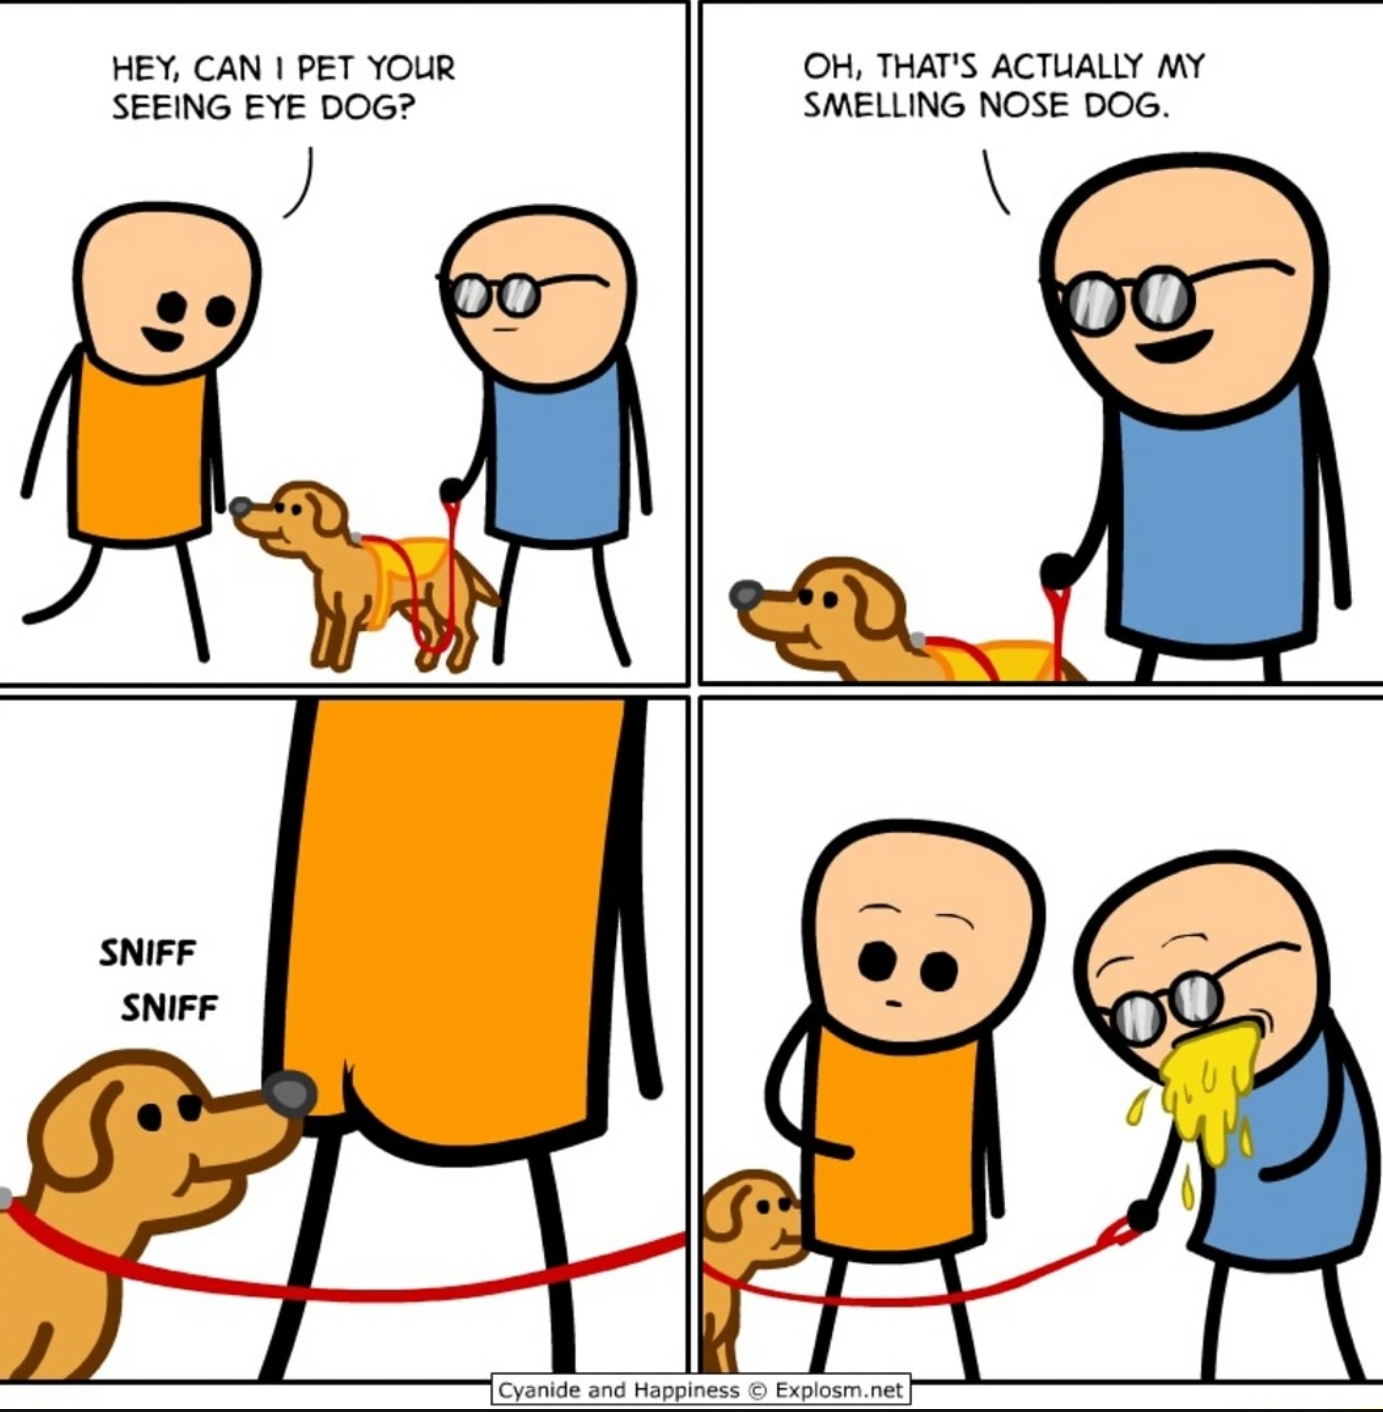 funny memes and pics -  dark humor cartoons - Hey, Can I Pet Your Seeing Eye Dog? Sniff Sniff 00 Oh, That'S Actually My Smelling Nose Dog. Cyanide and Happiness Explosm.net